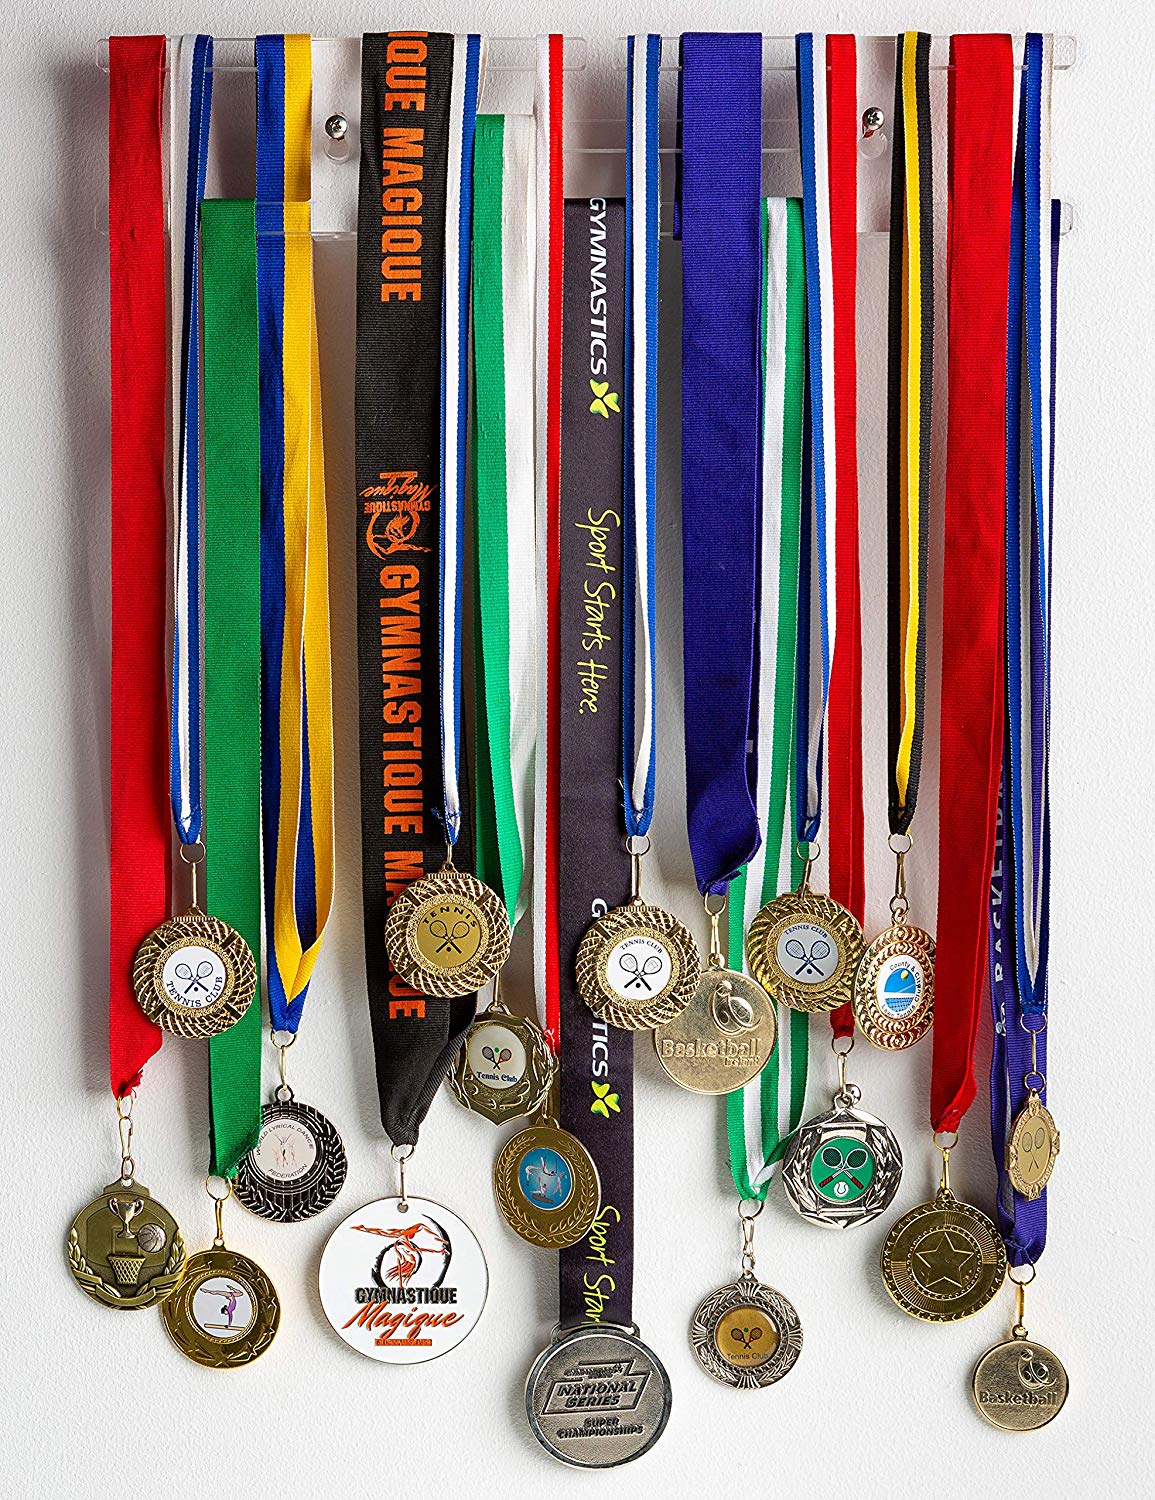 FREE Post! Medal Holder Acrylic Display Hanger I Crossed The Line 